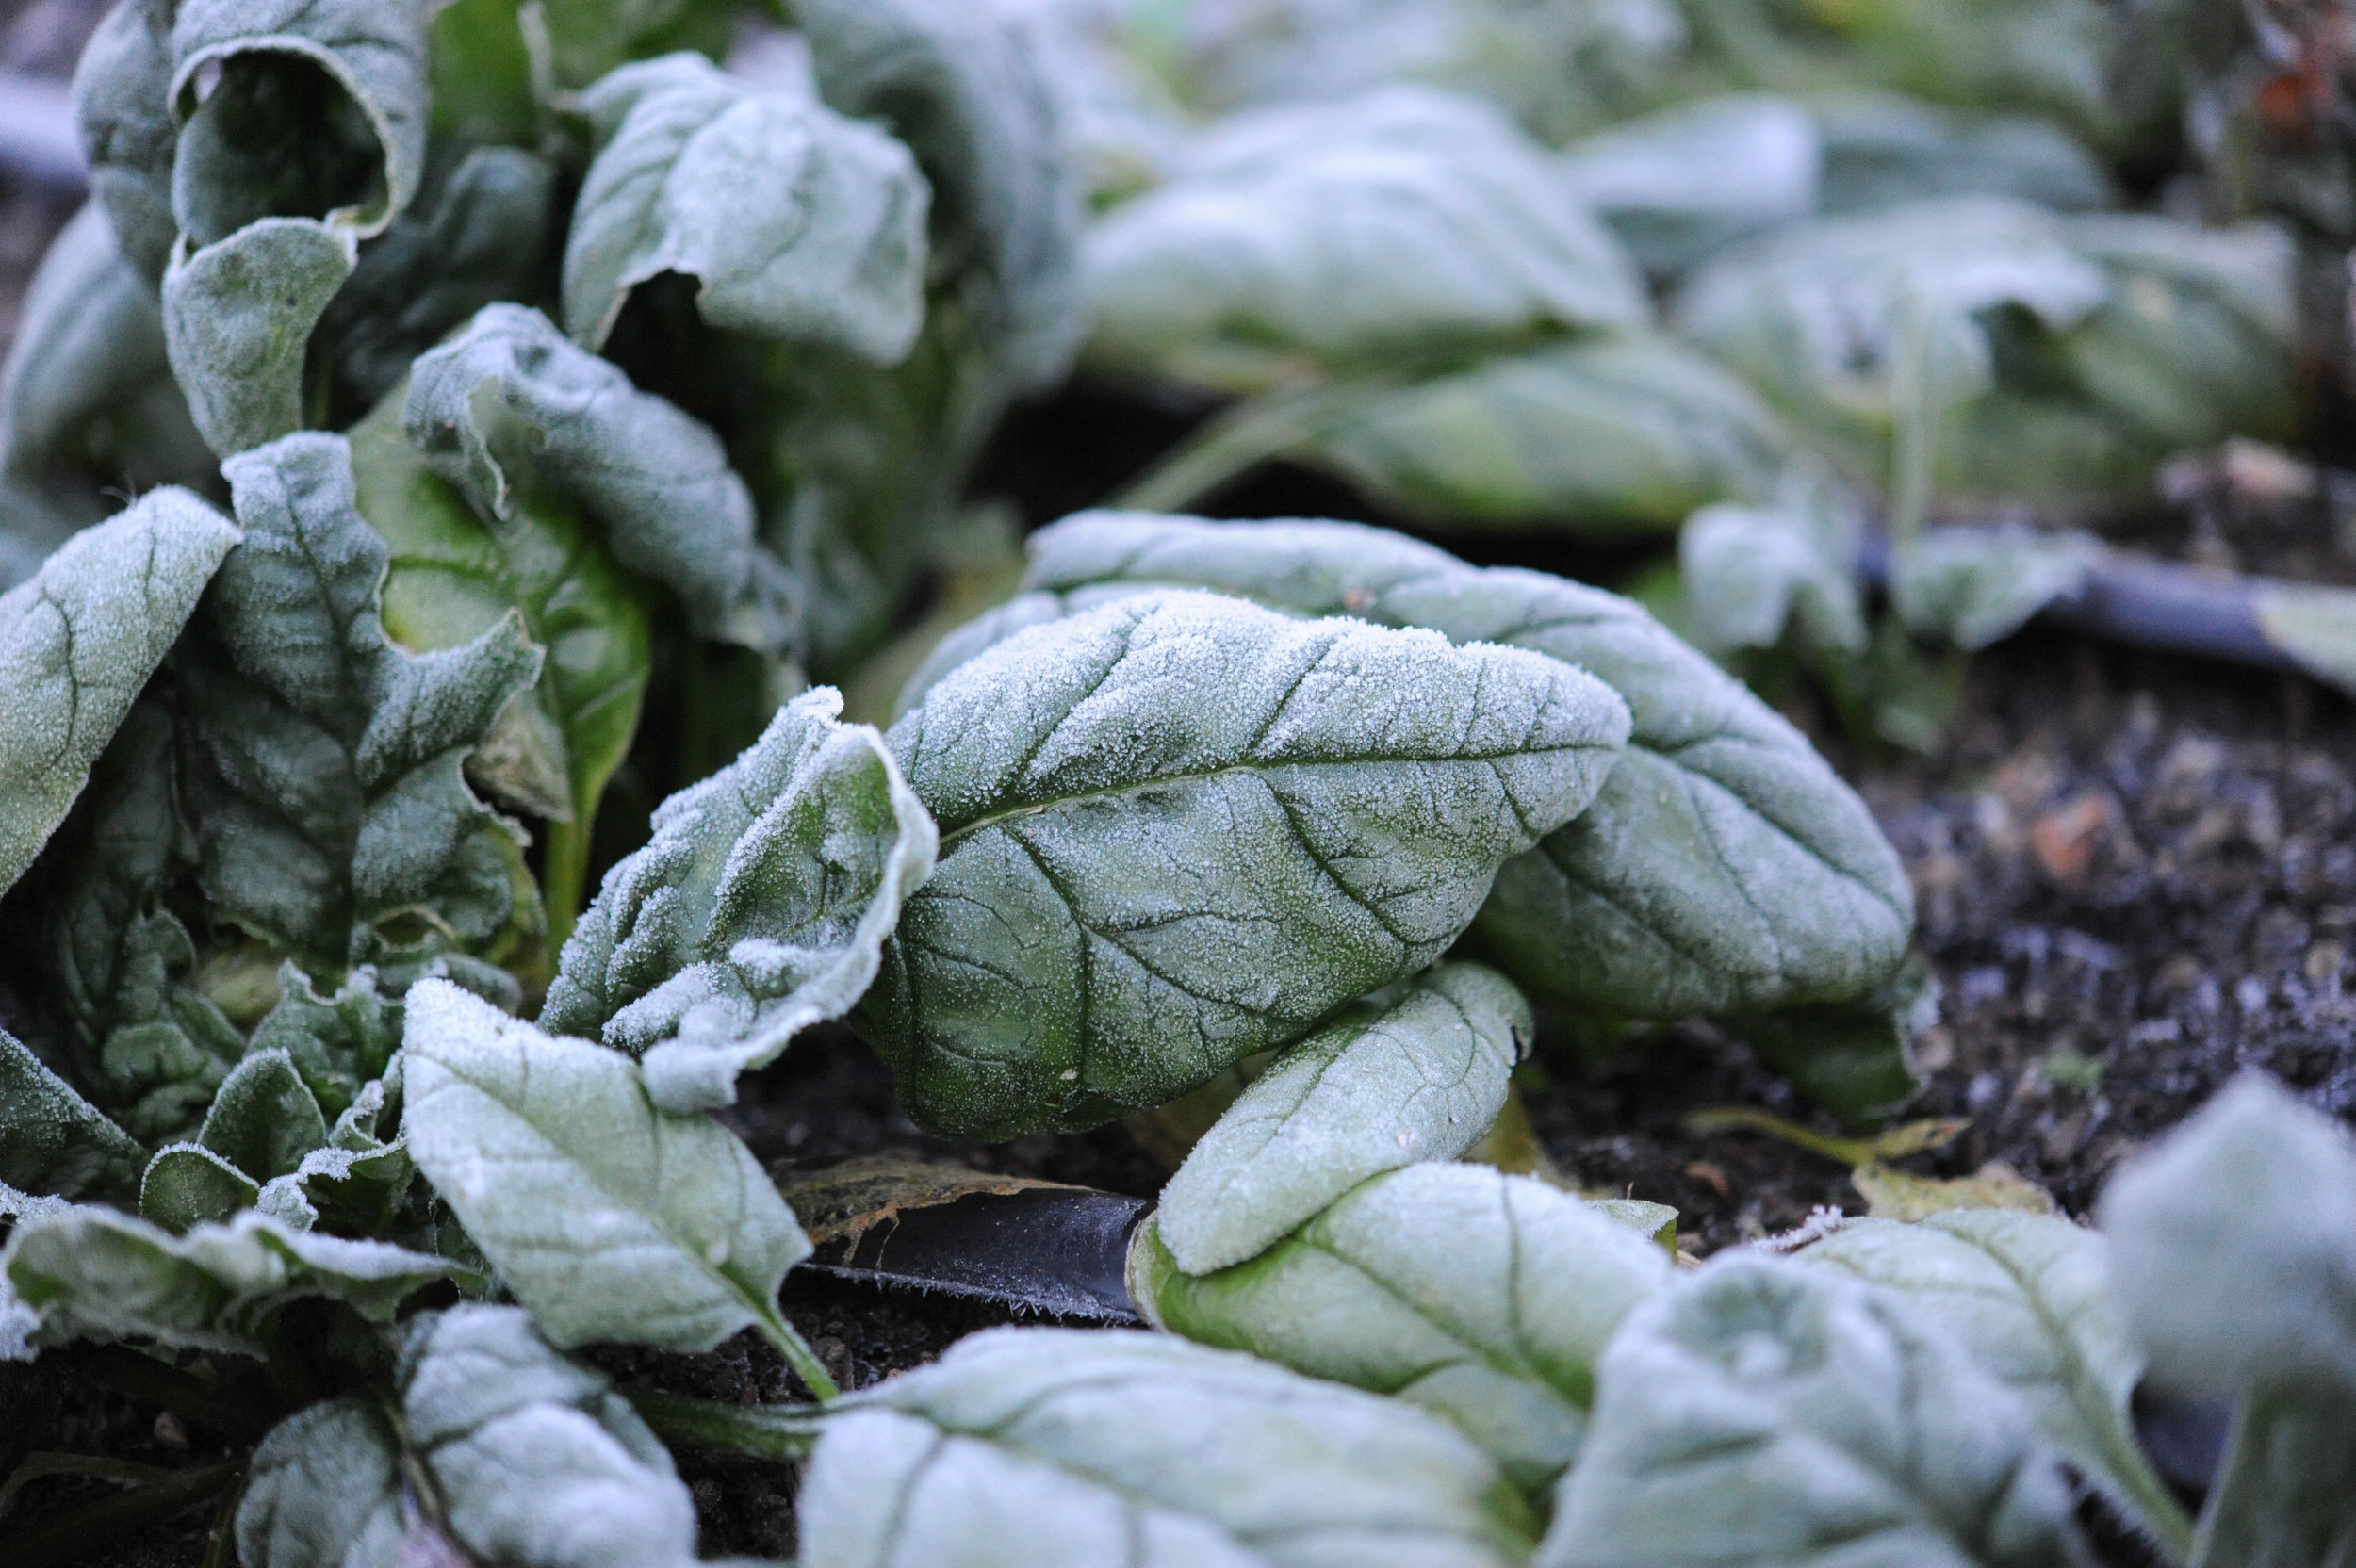 Frost on spinach